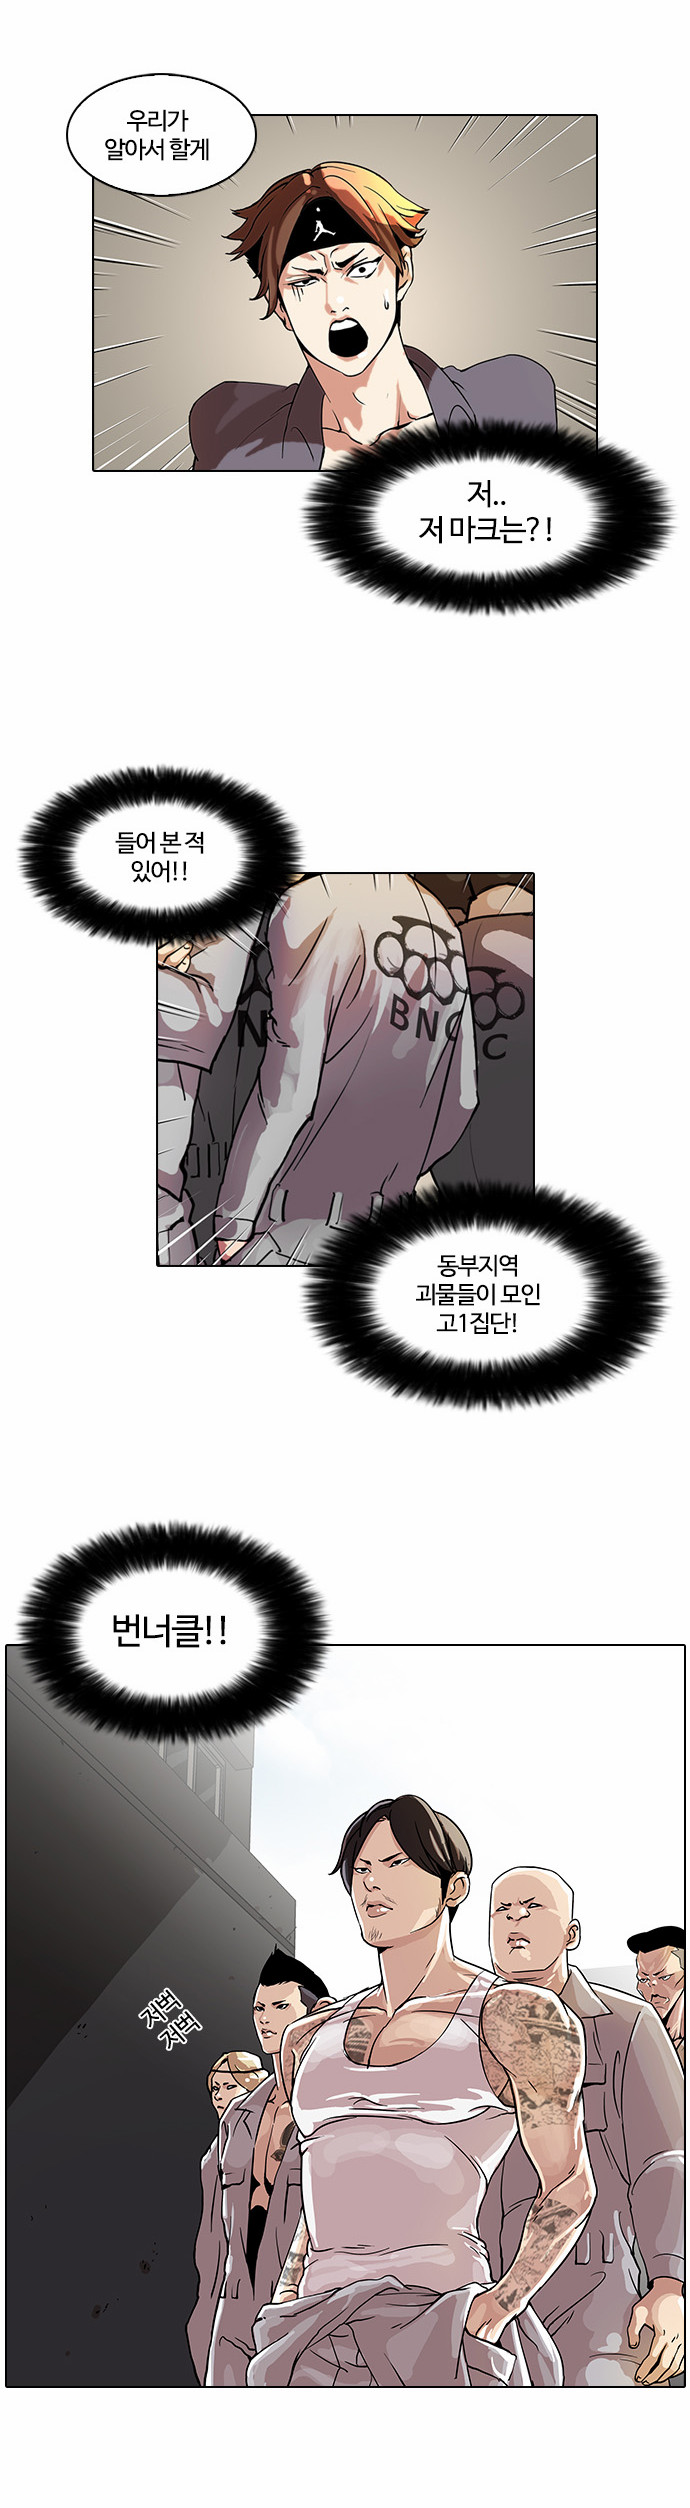 Lookism - Chapter 37 - Page 28